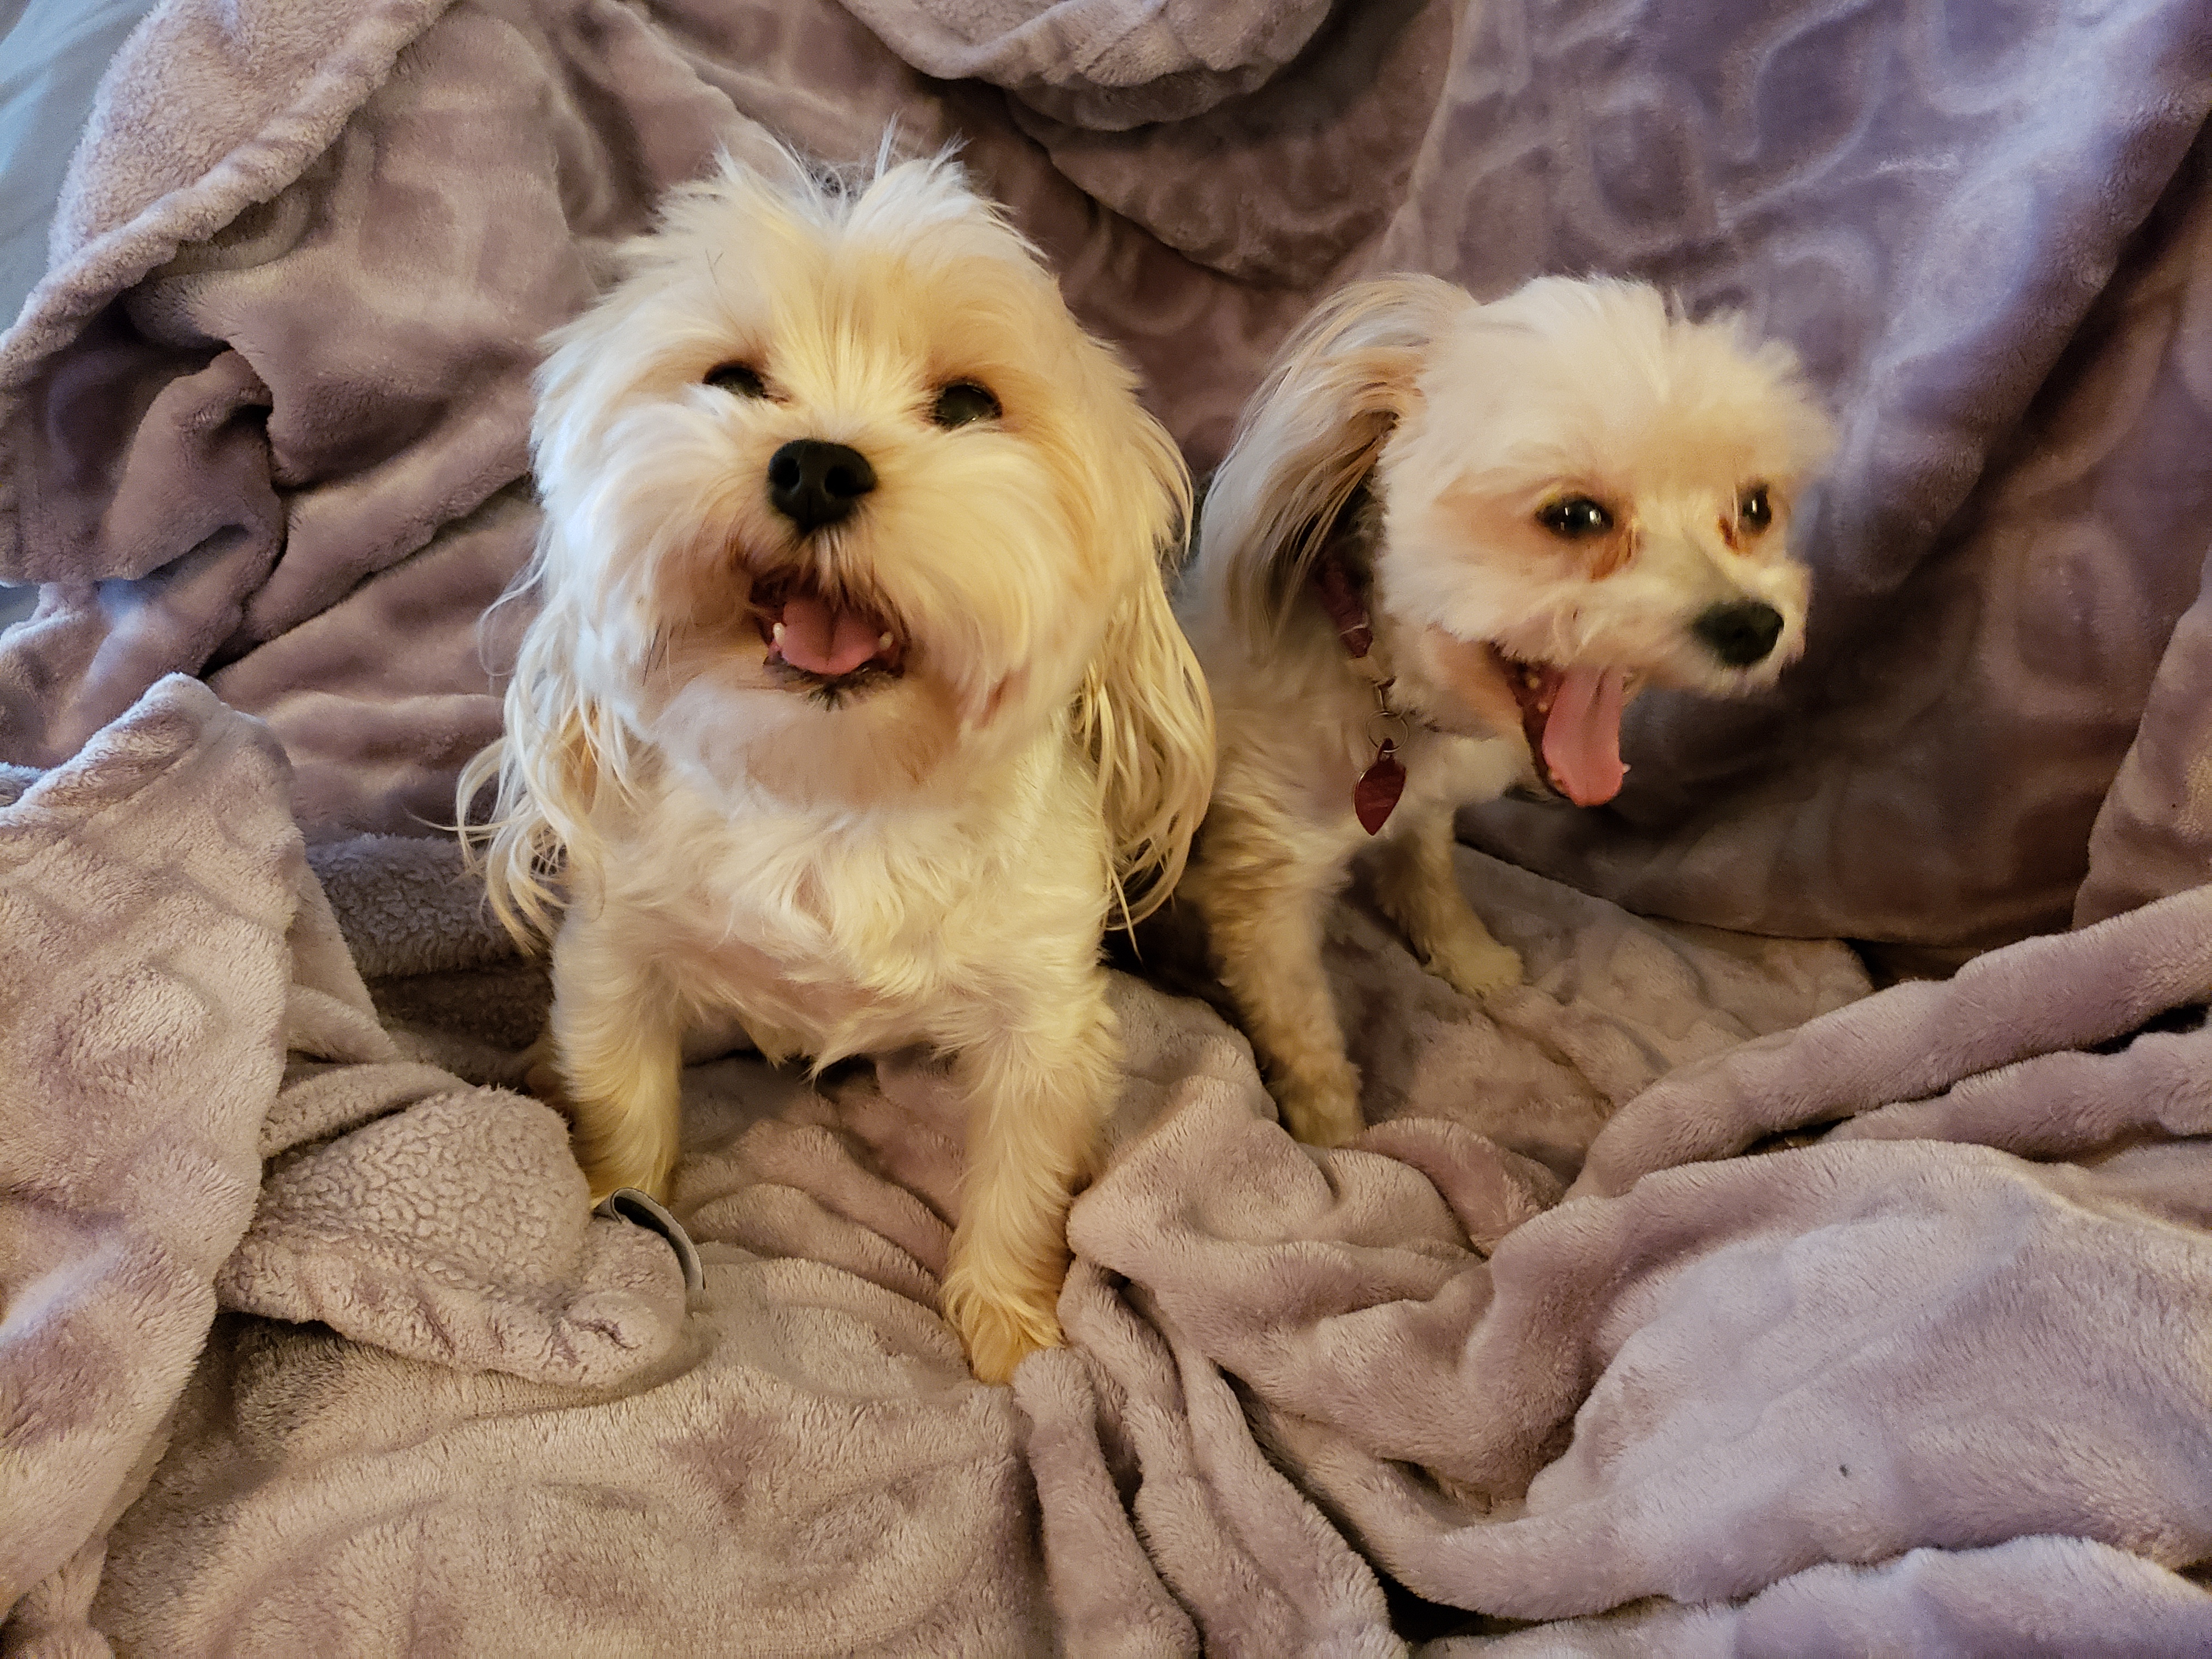 Smaller dogs like Morkie and Miniature Yorkie have unique issues that will require special dog training. Get your training early and have great smaller dogs